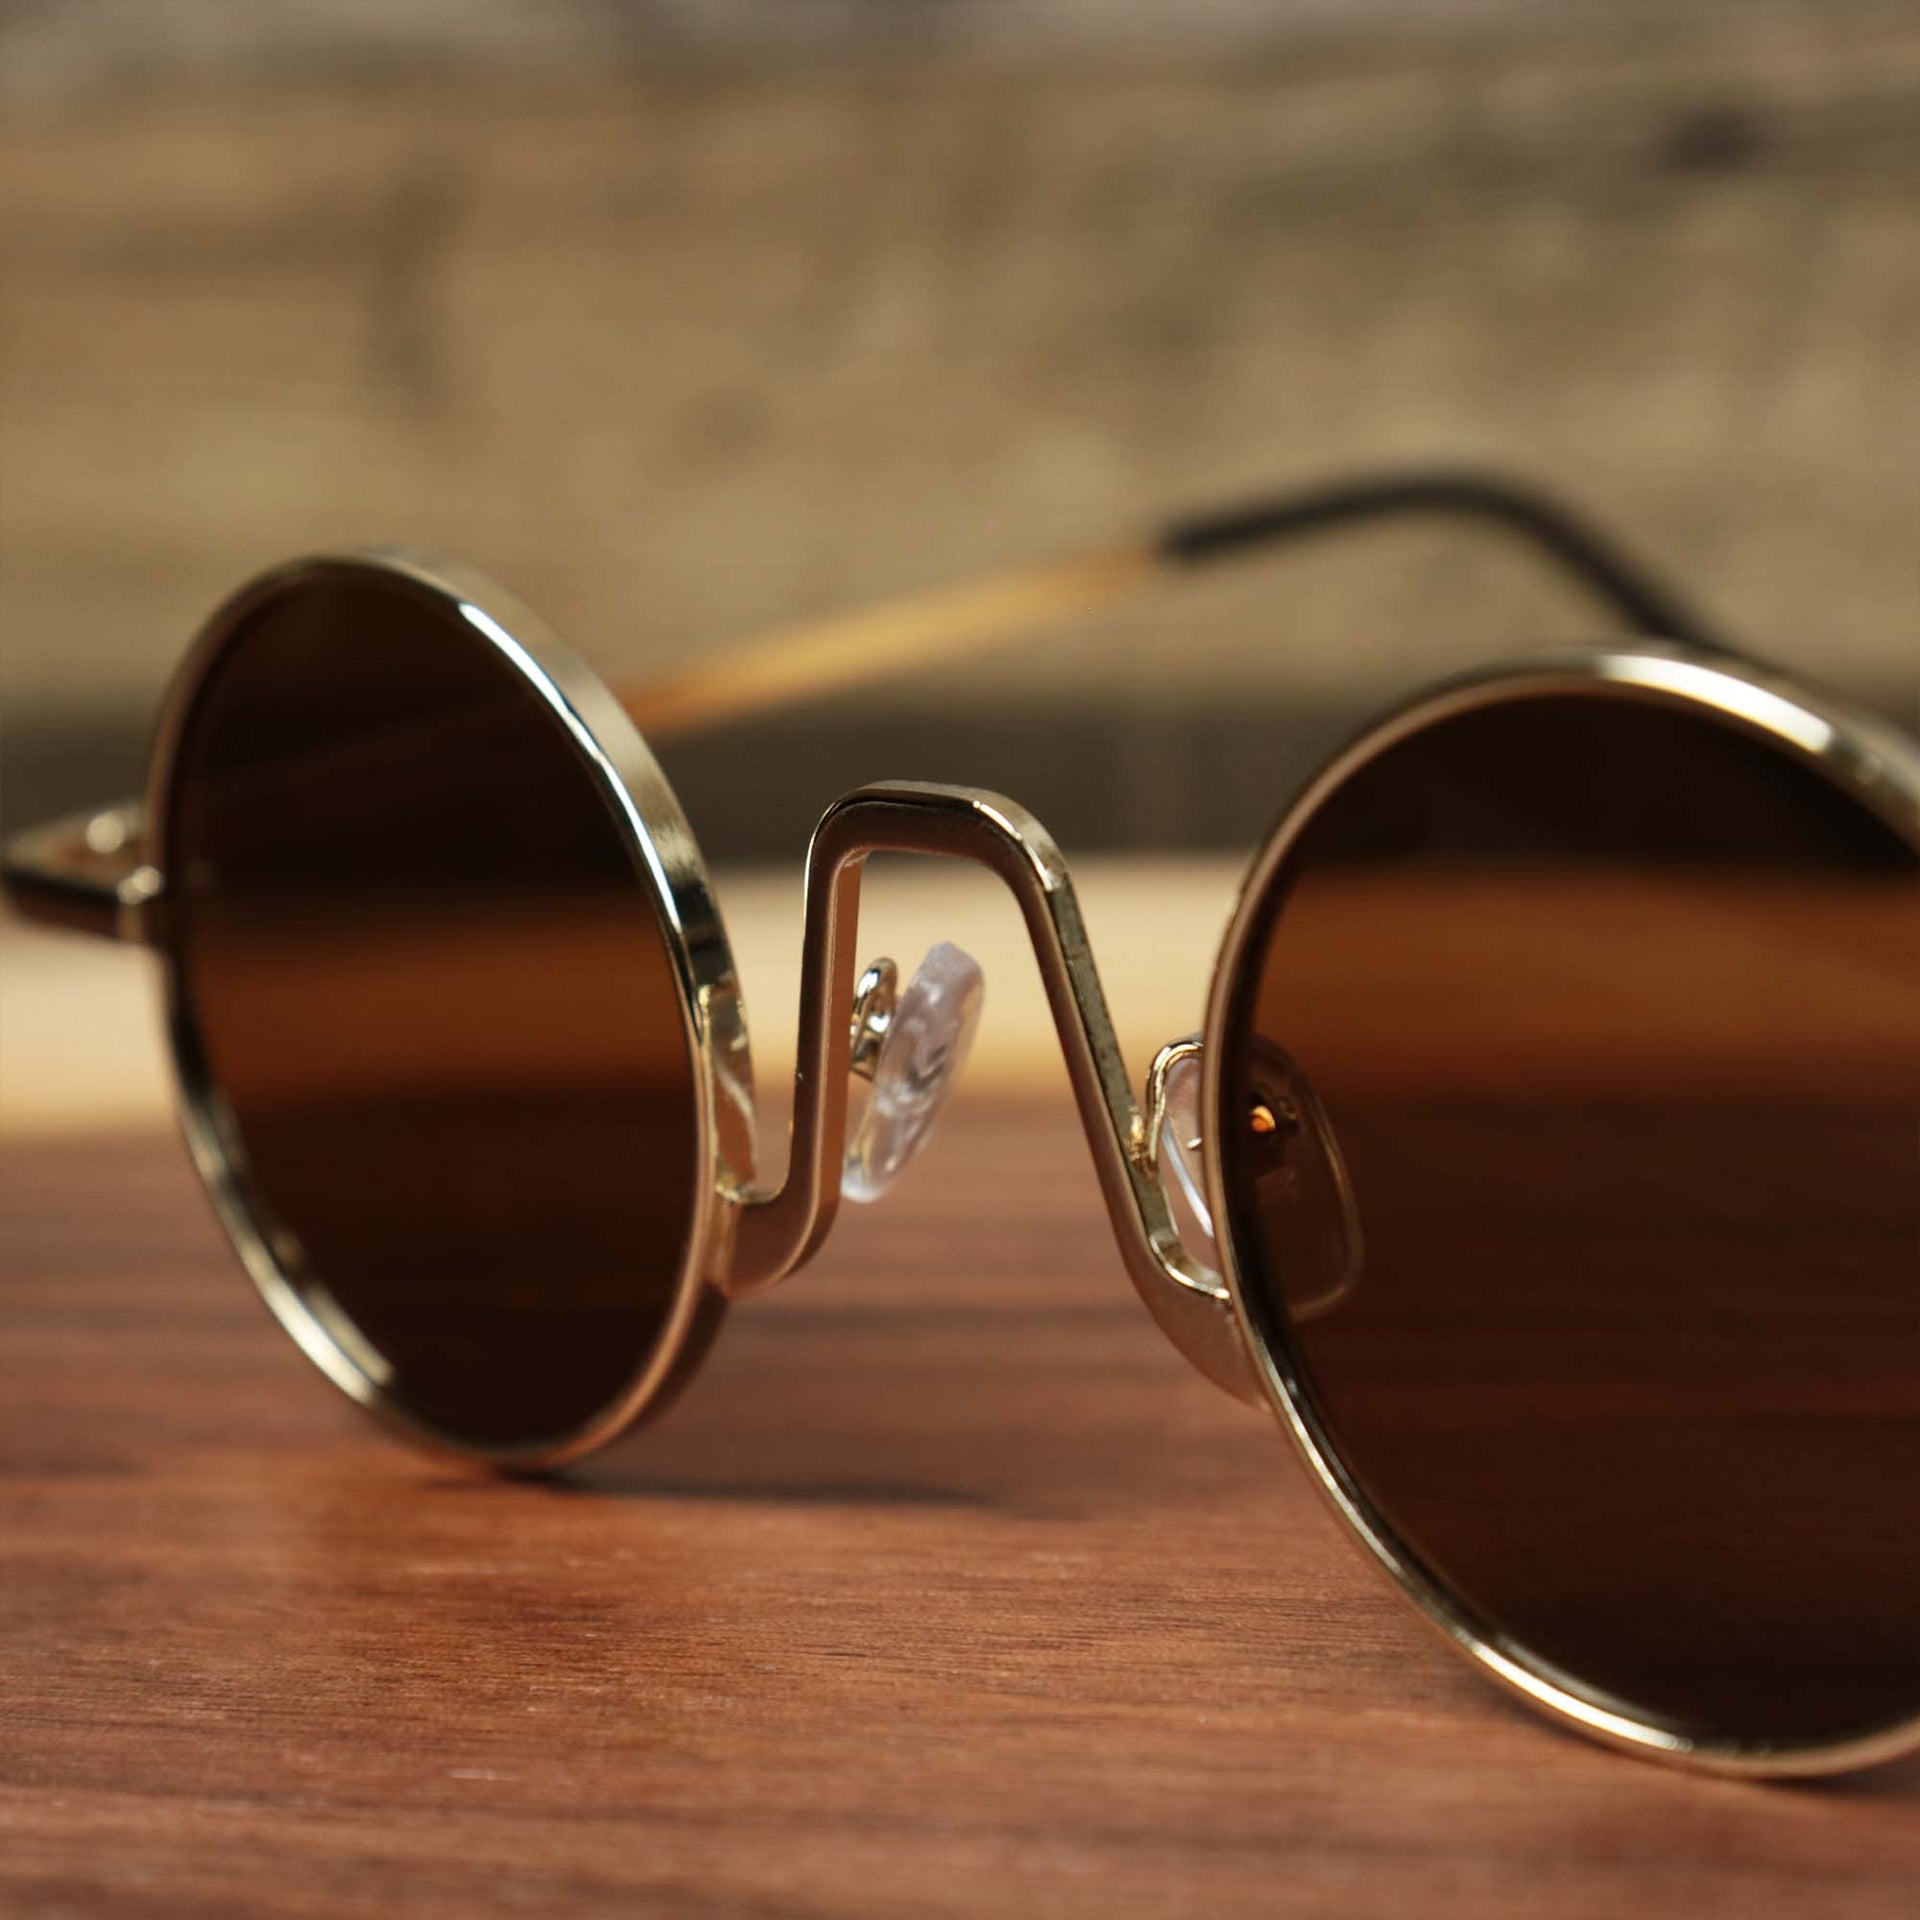 The bridge on the Round Frames Brown Lens Sunglasses with Gold Frame